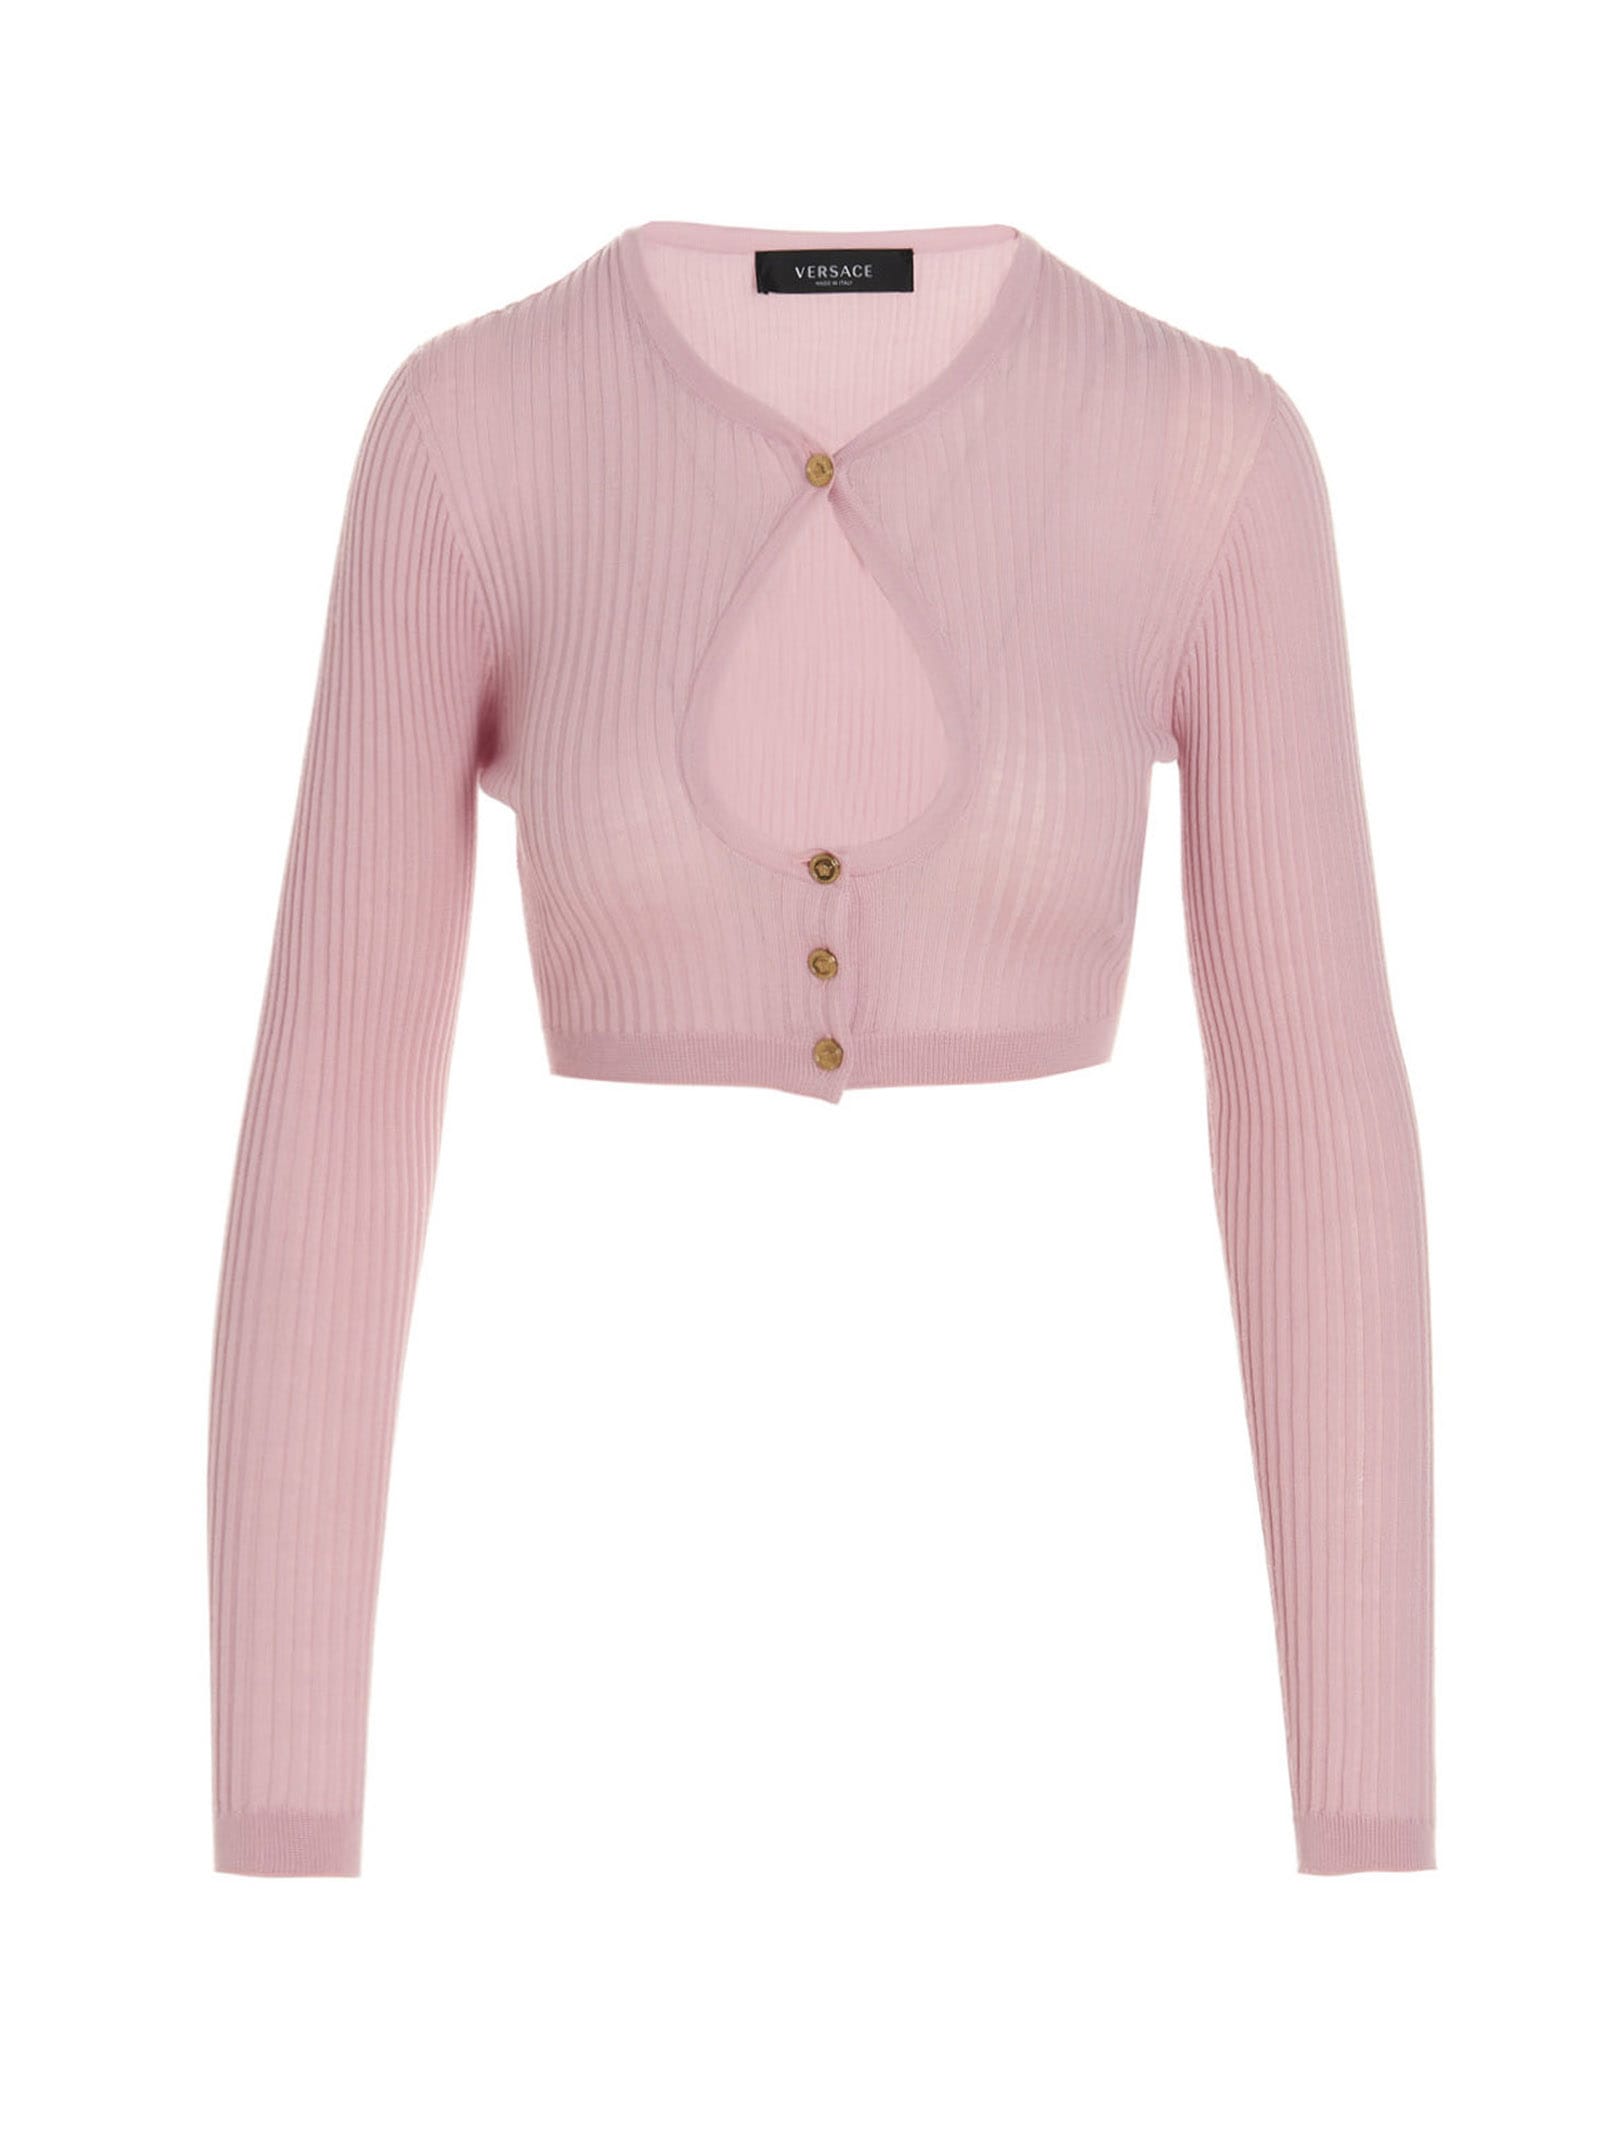 Versace Cropped Cut Out Cardigan